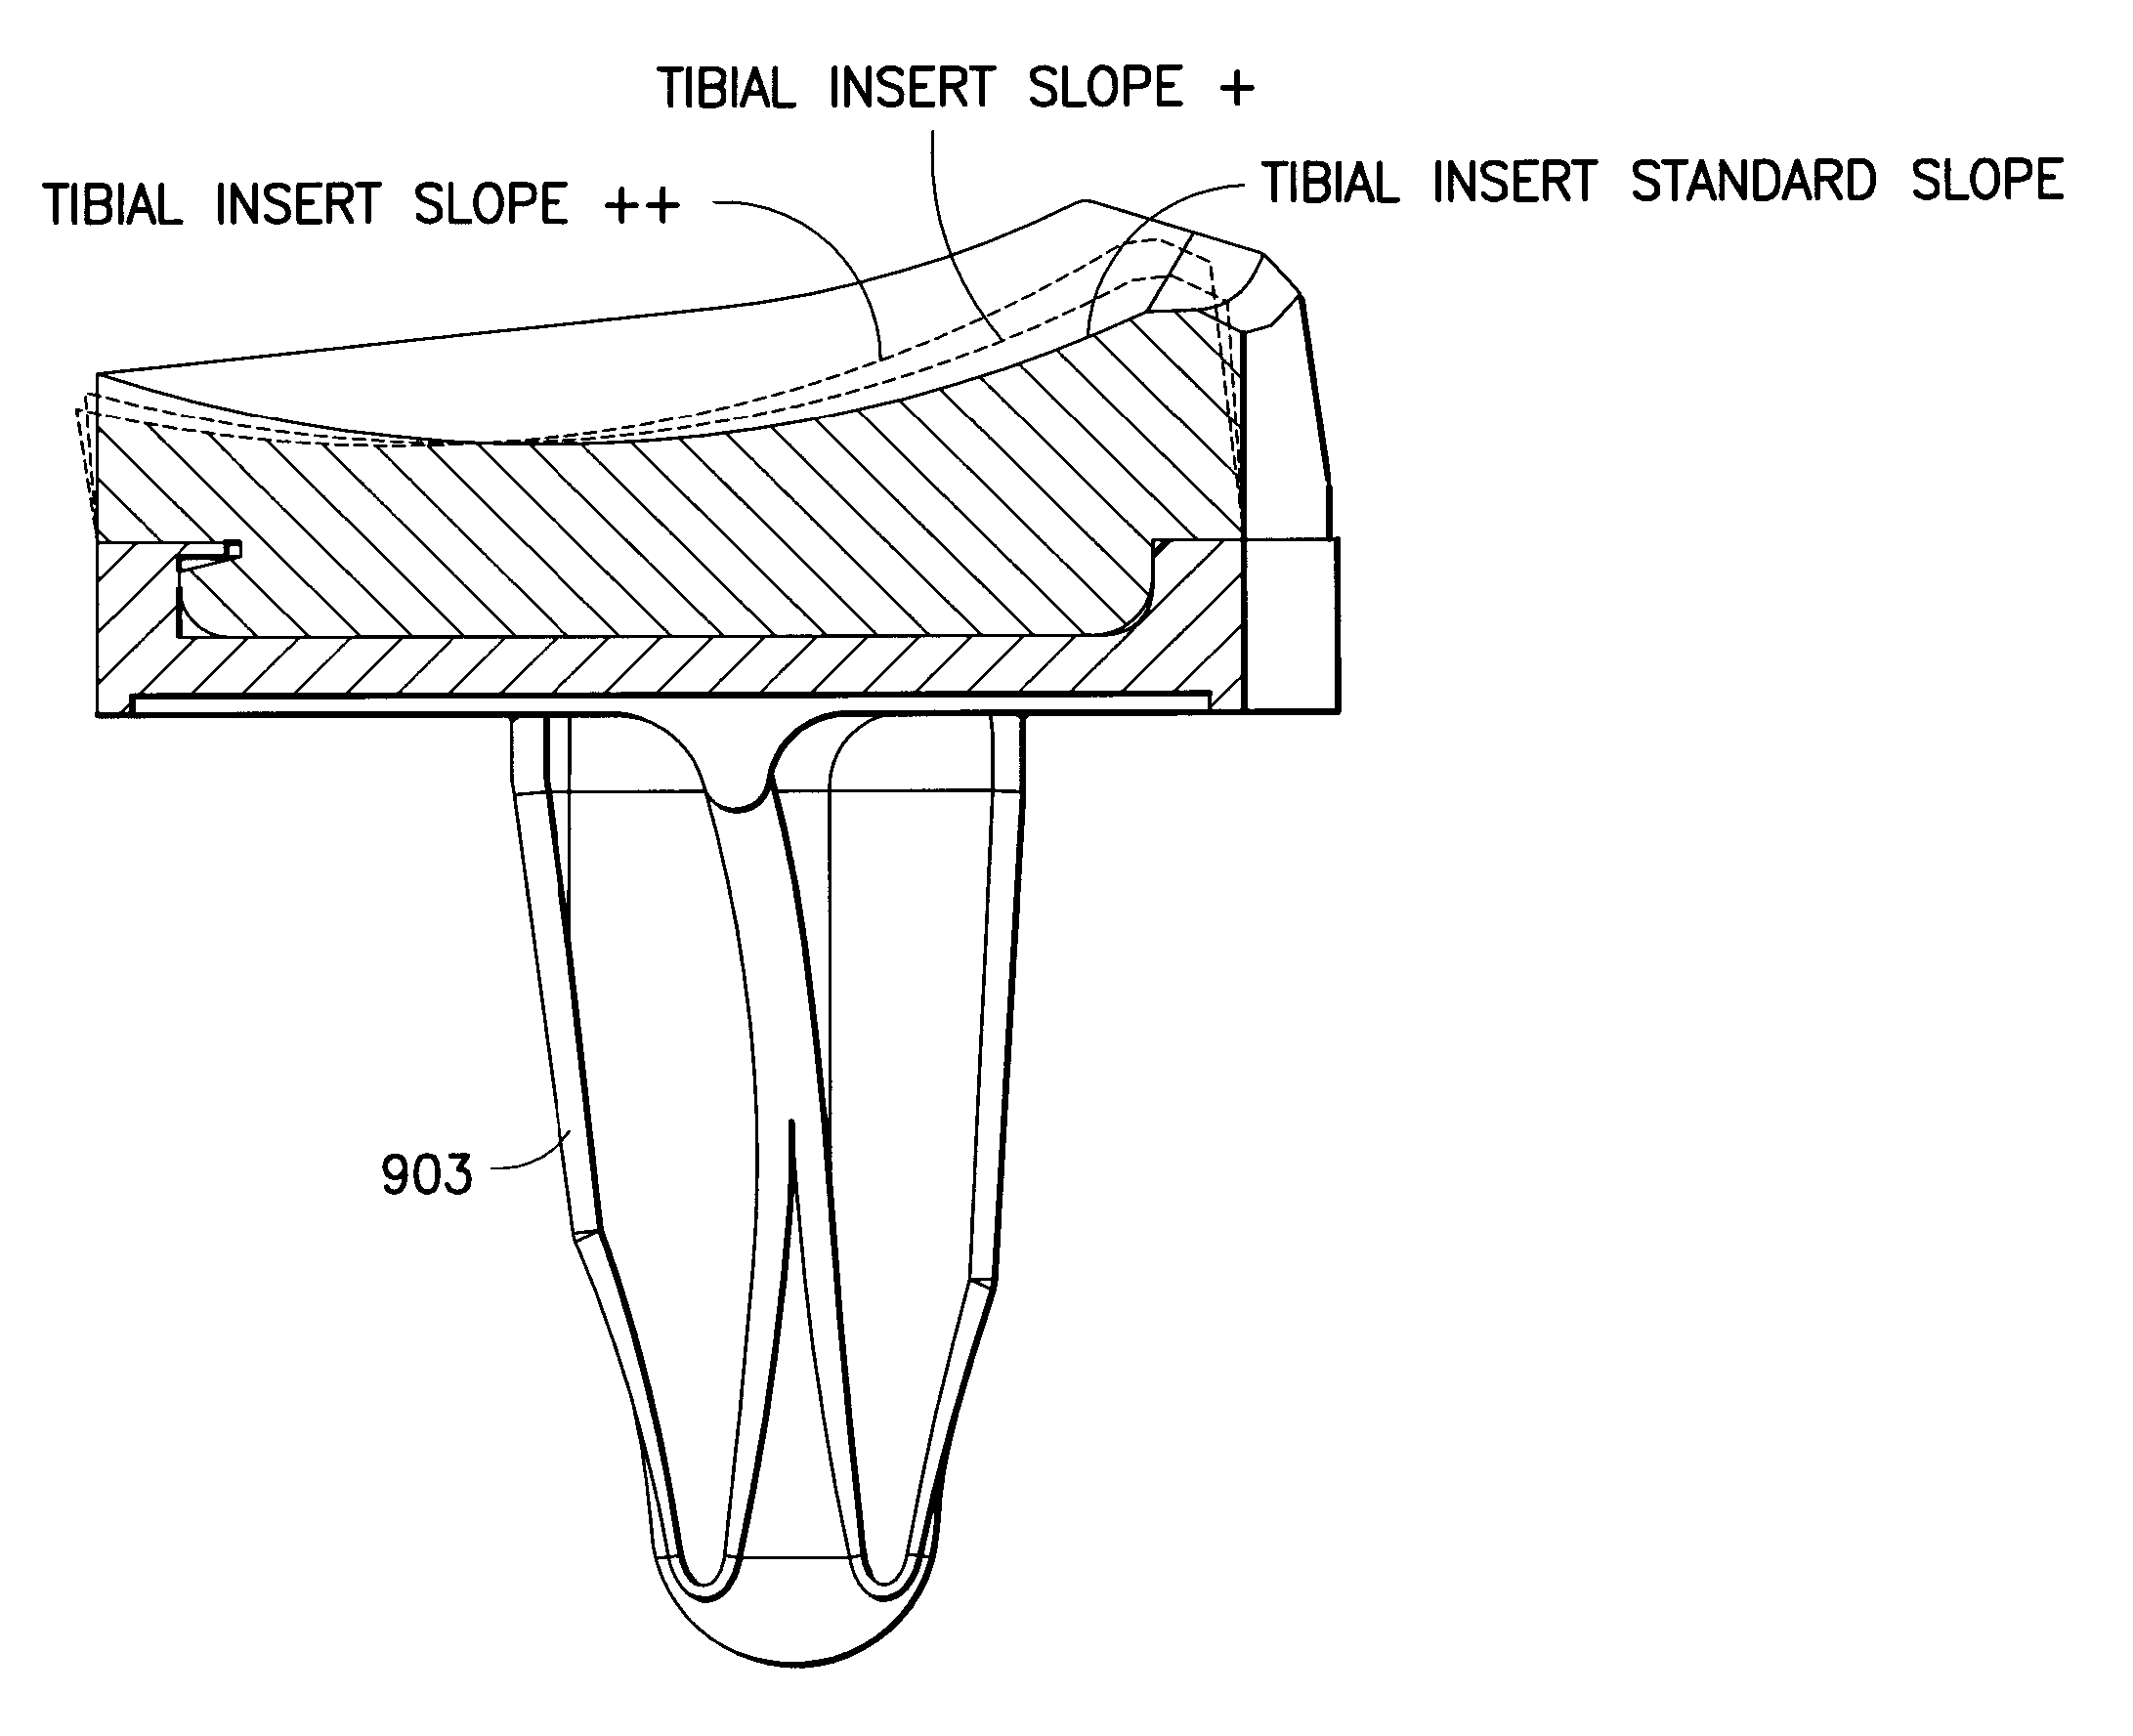 Knee prosthesis system with at least a first tibial portion element (a tibial insert or tibial trial) and a second tibial portion element (a tibial insert or tibial trial), wherein each of the first tibial portion element and the second tibial portion element has a different slope